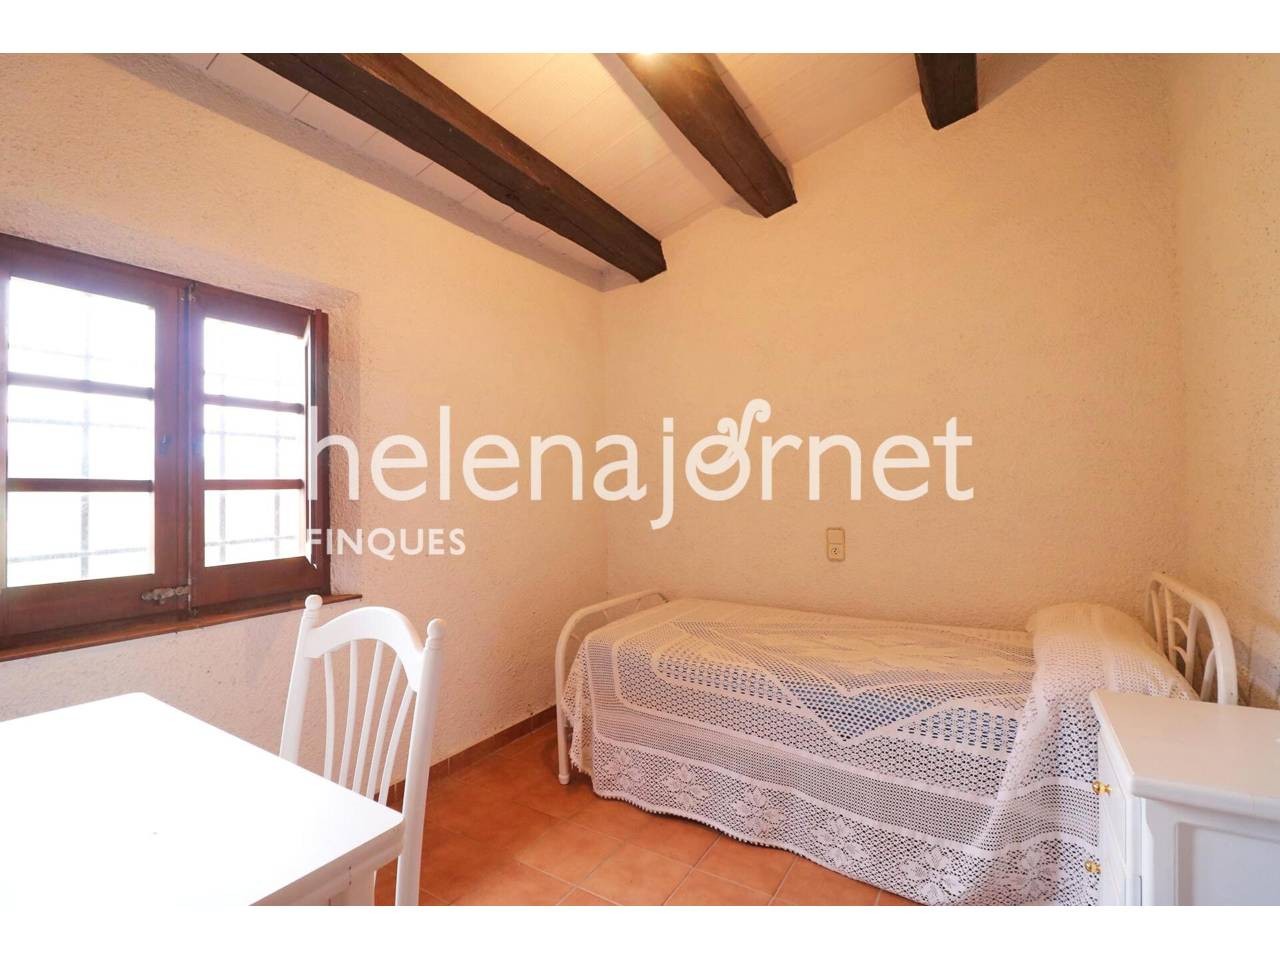 Catalan country house with 7Ha of land in Catalonia - 2477